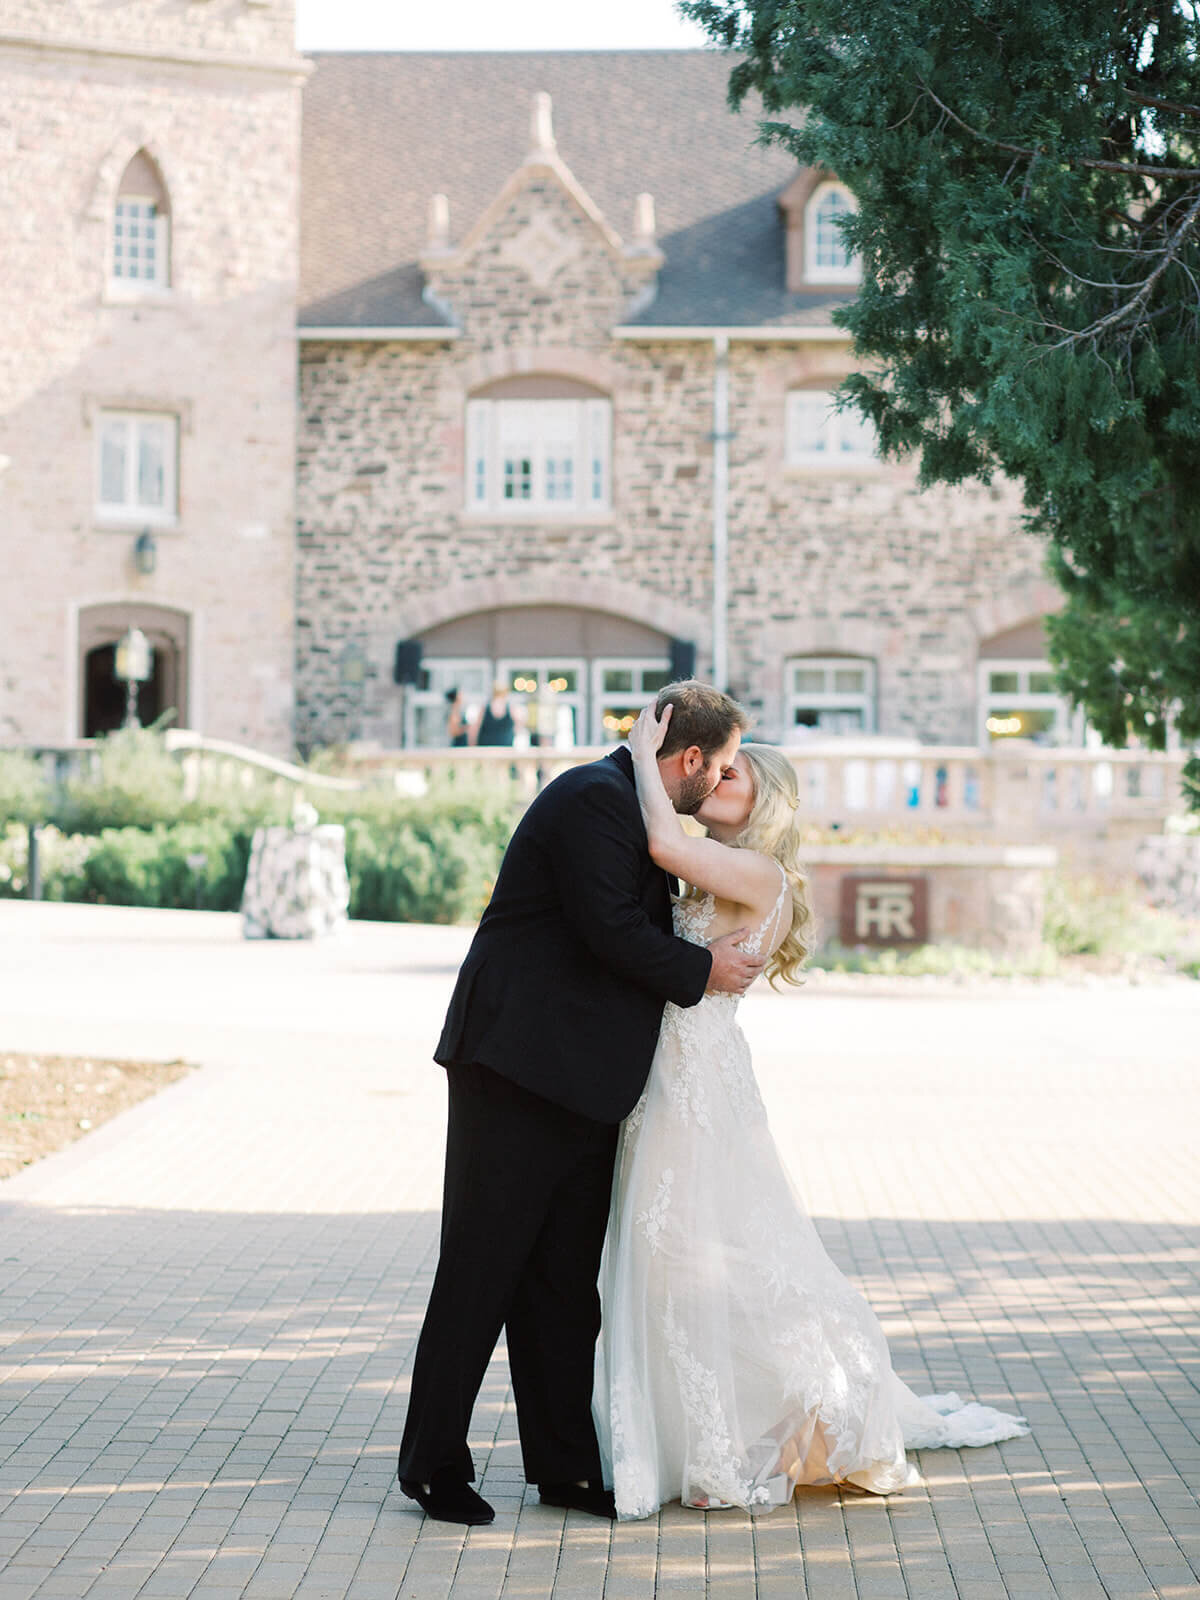 Bride and groom kissing in front of a castle